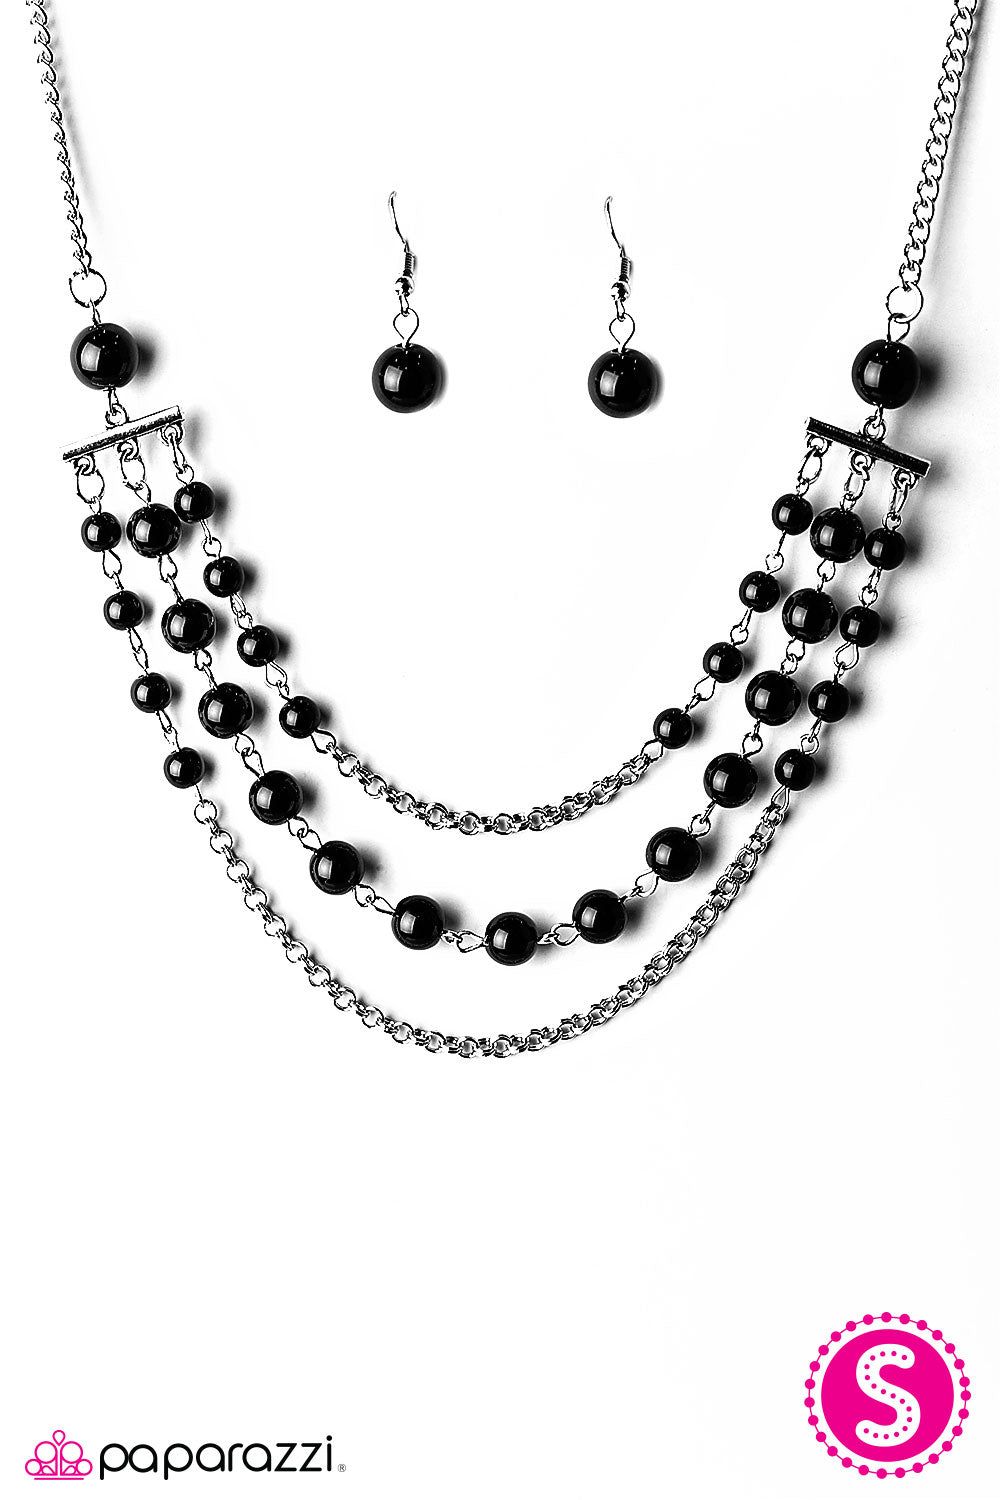 Paparazzi ♥ Dressed For Success - Black ♥  Necklace